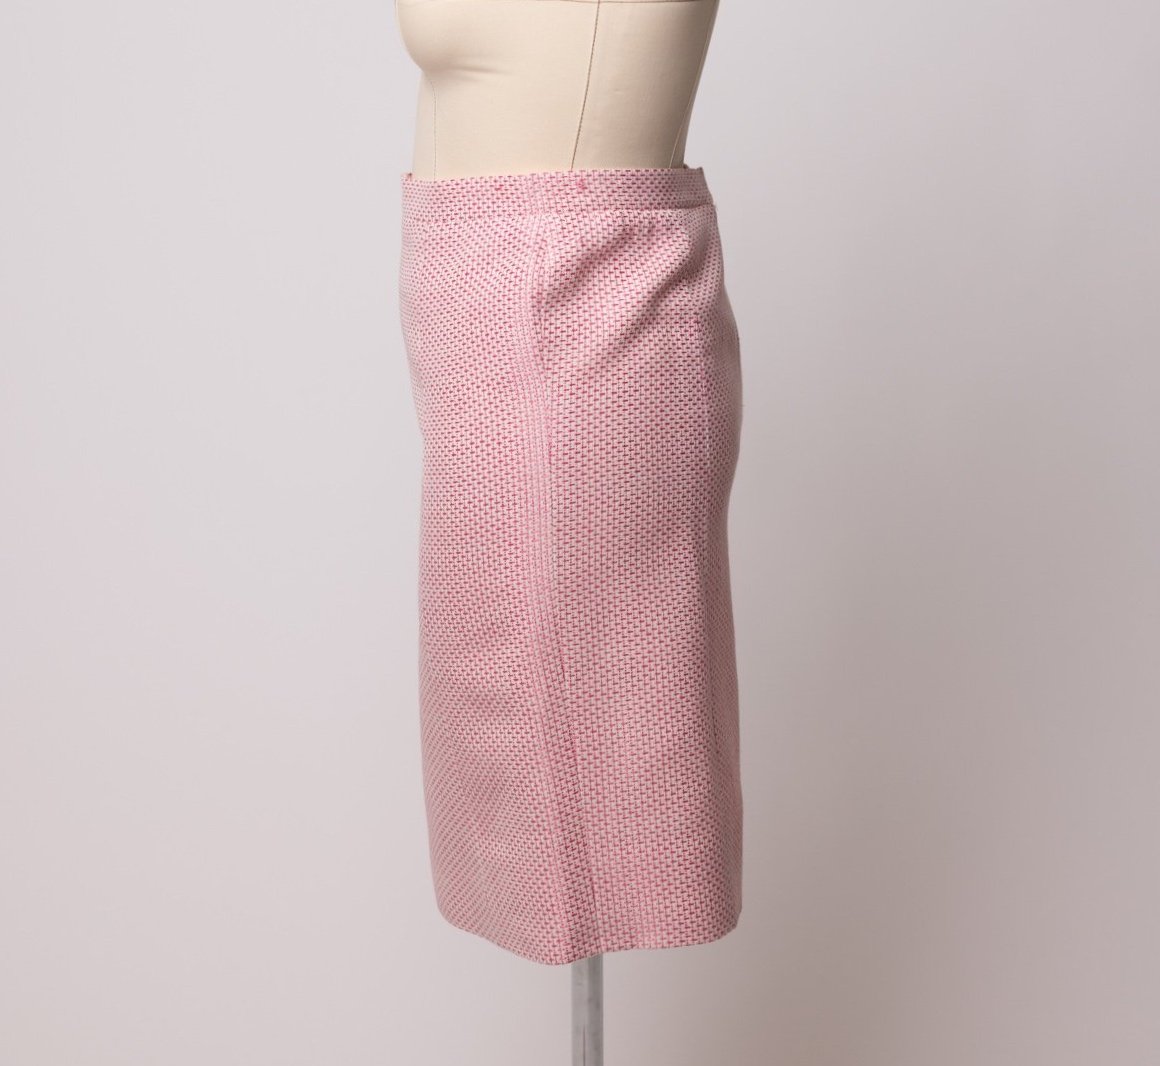 CHANEL | Pink And White Tweed Skirt Suit